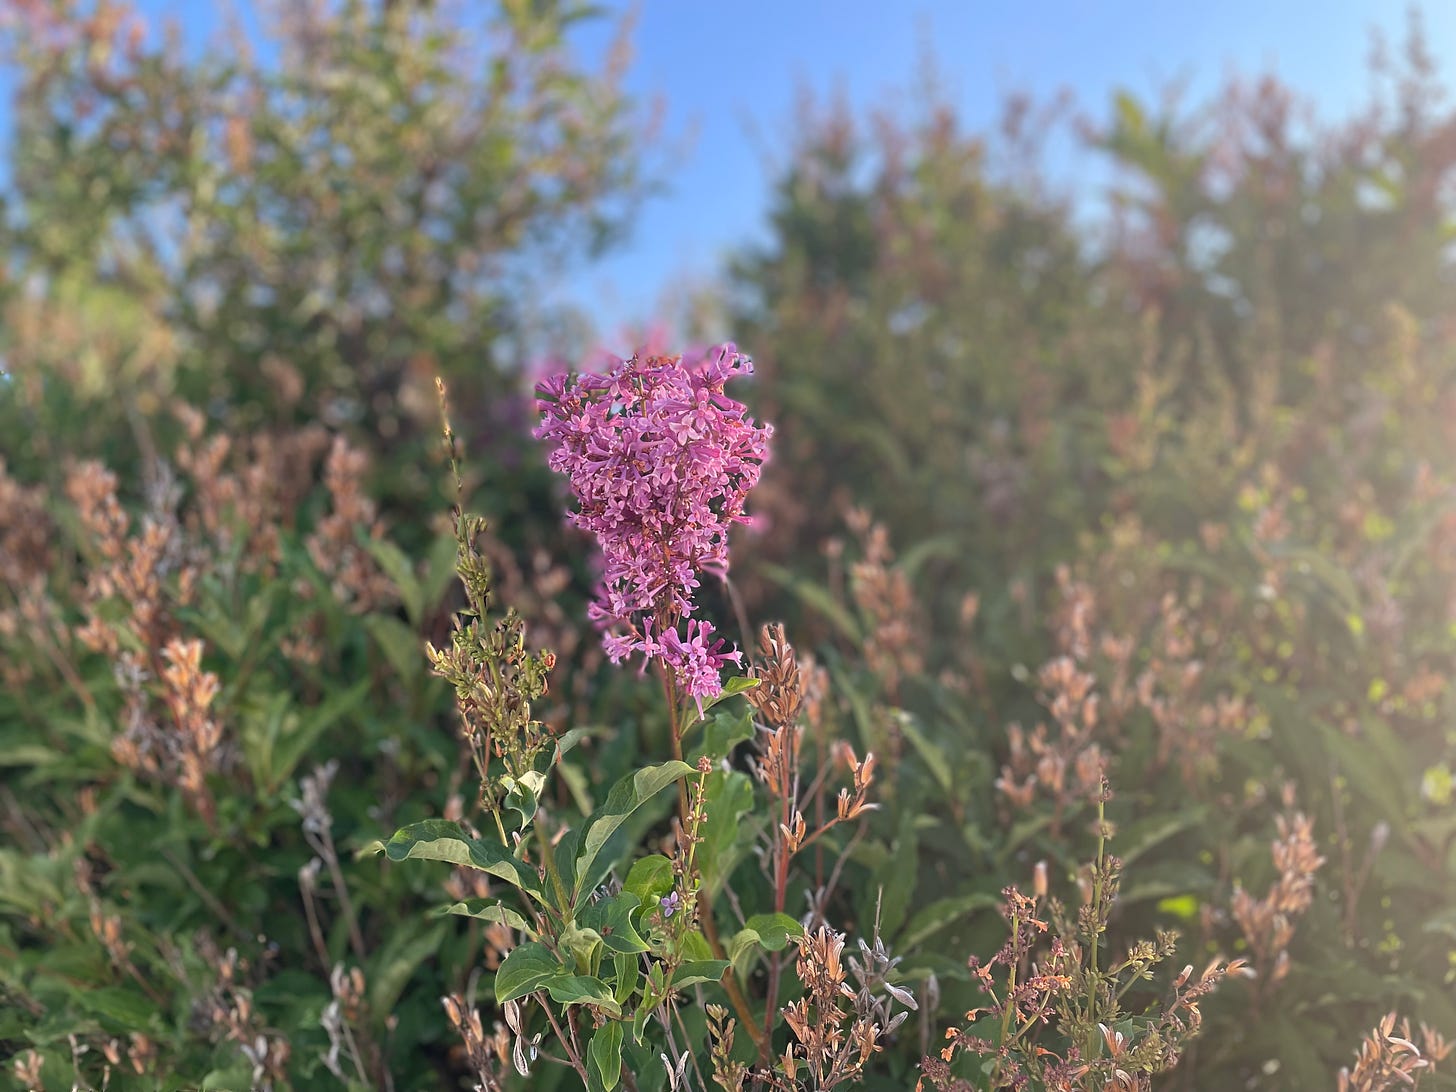 A picture of a flower against a blurred background of bushes